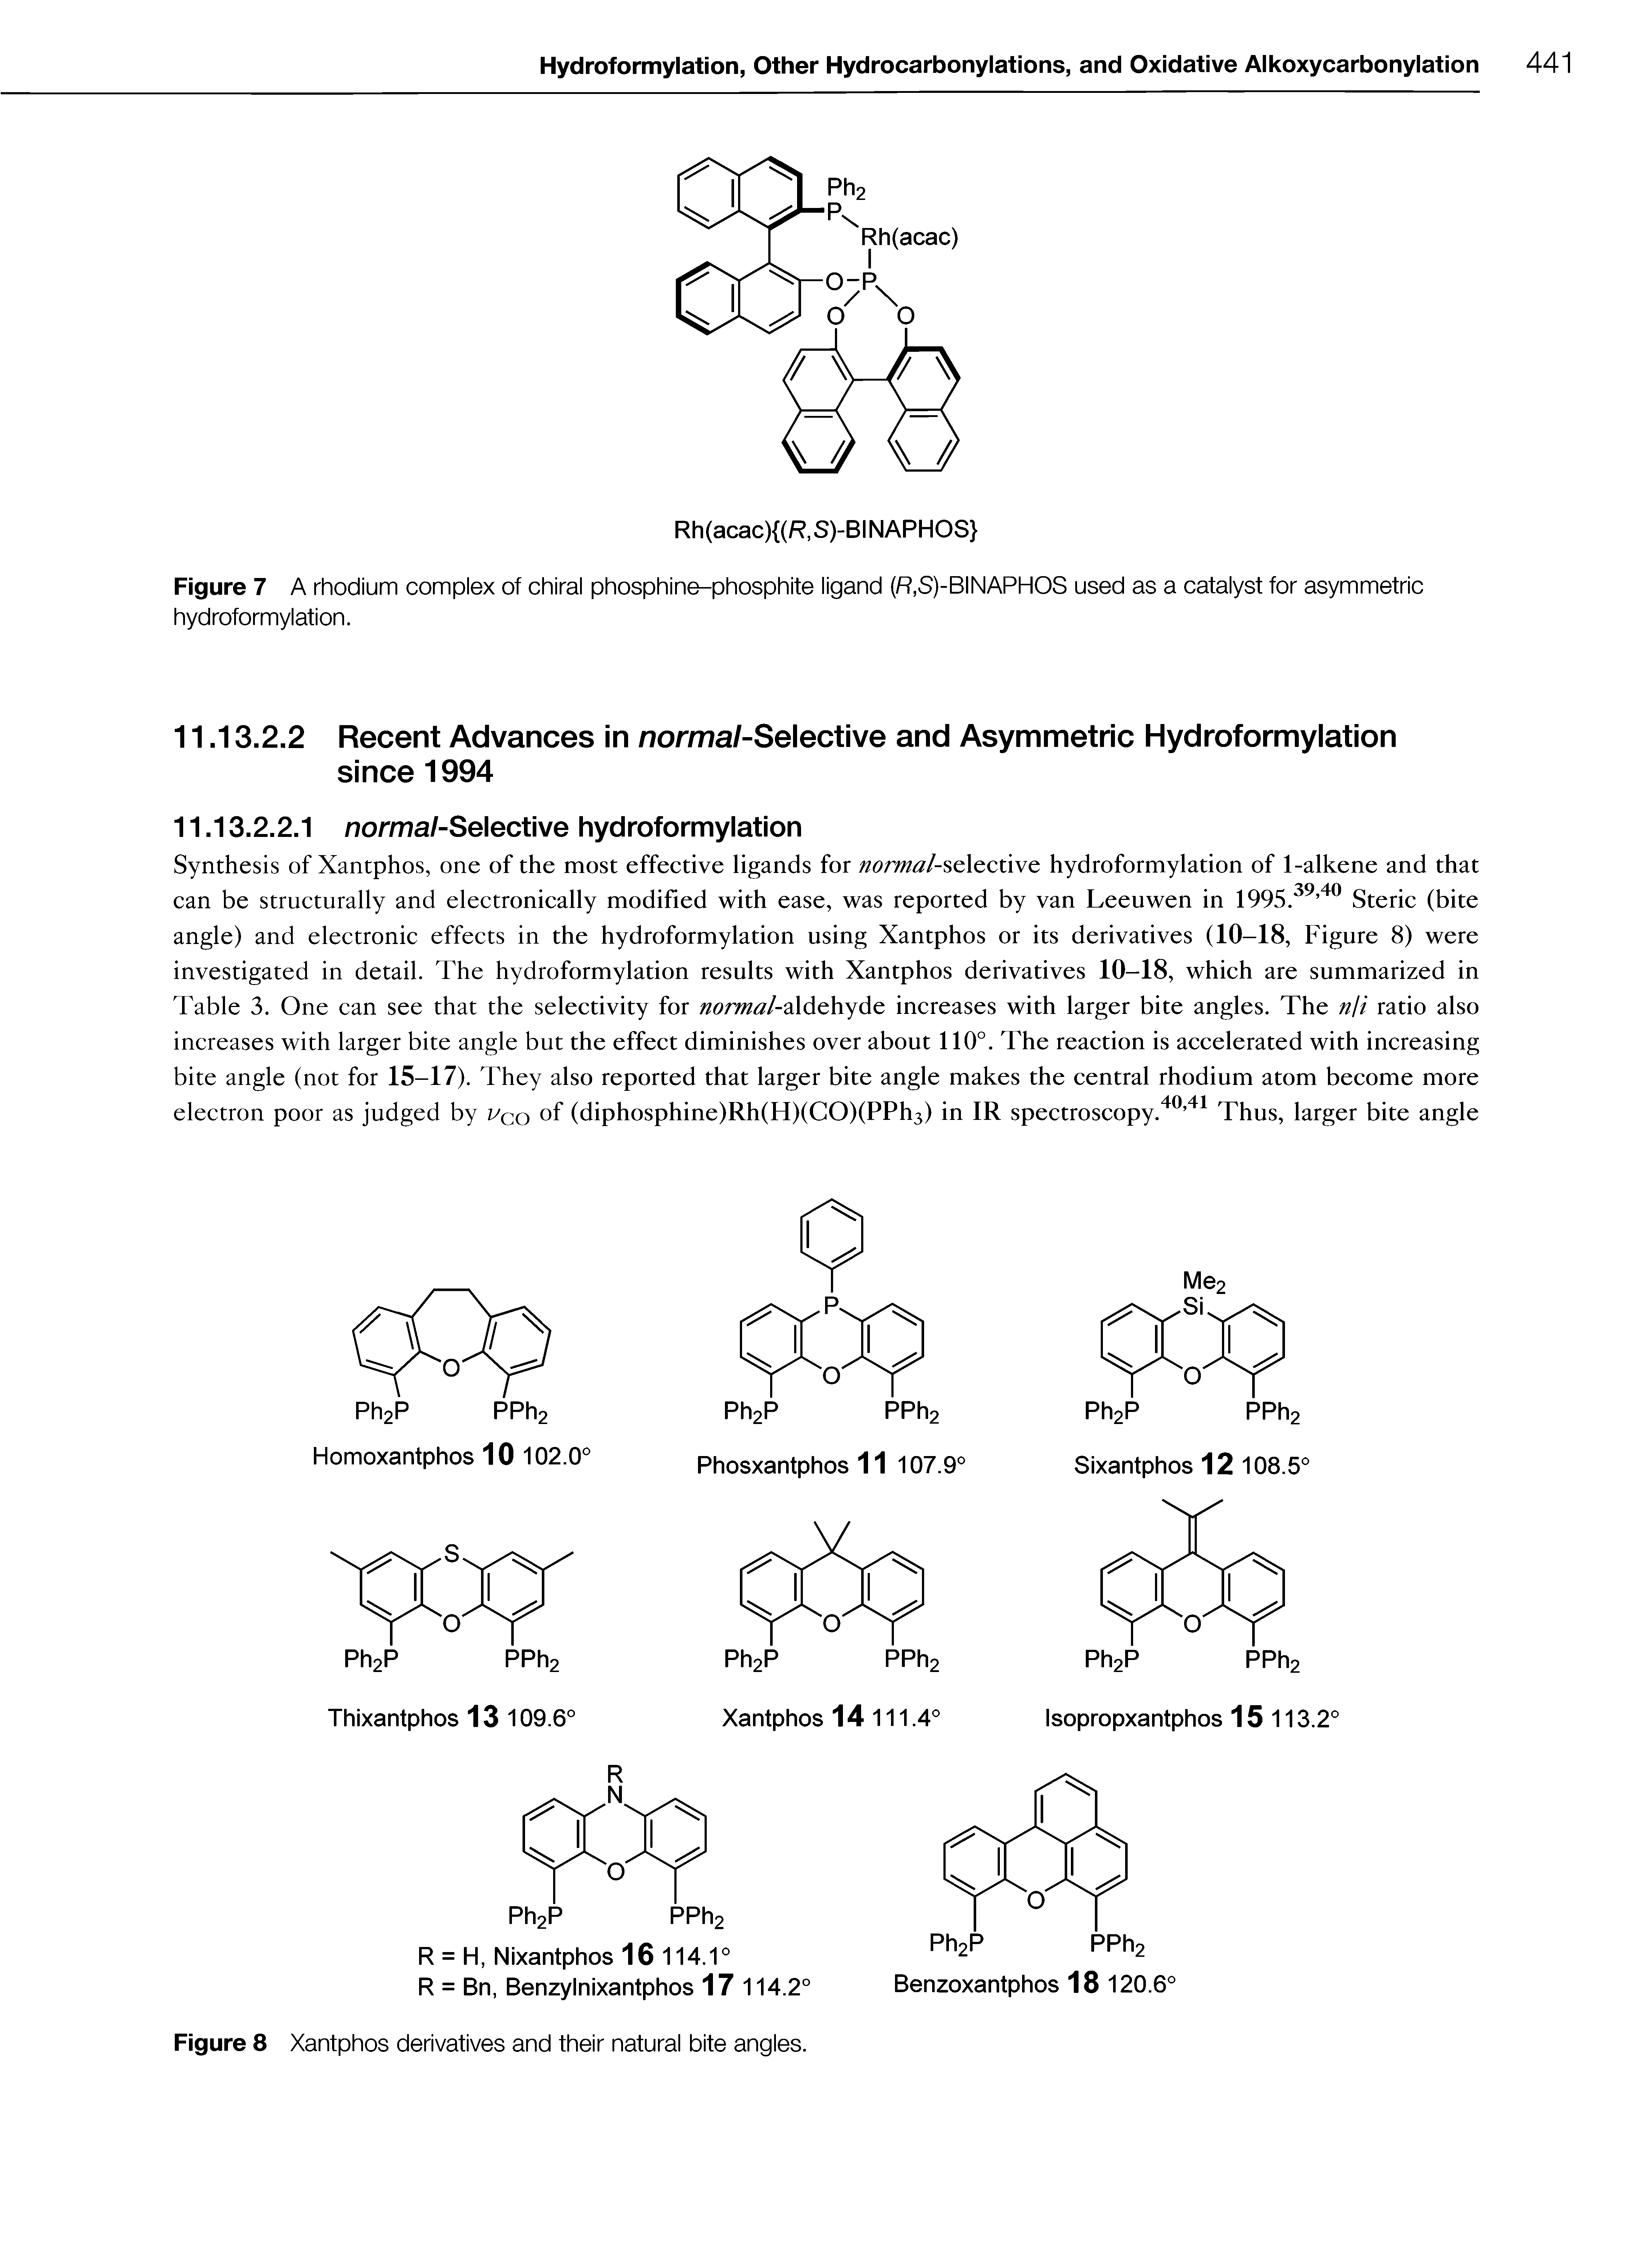 Figure 8 Xantphos derivatives and their natural bite angles.